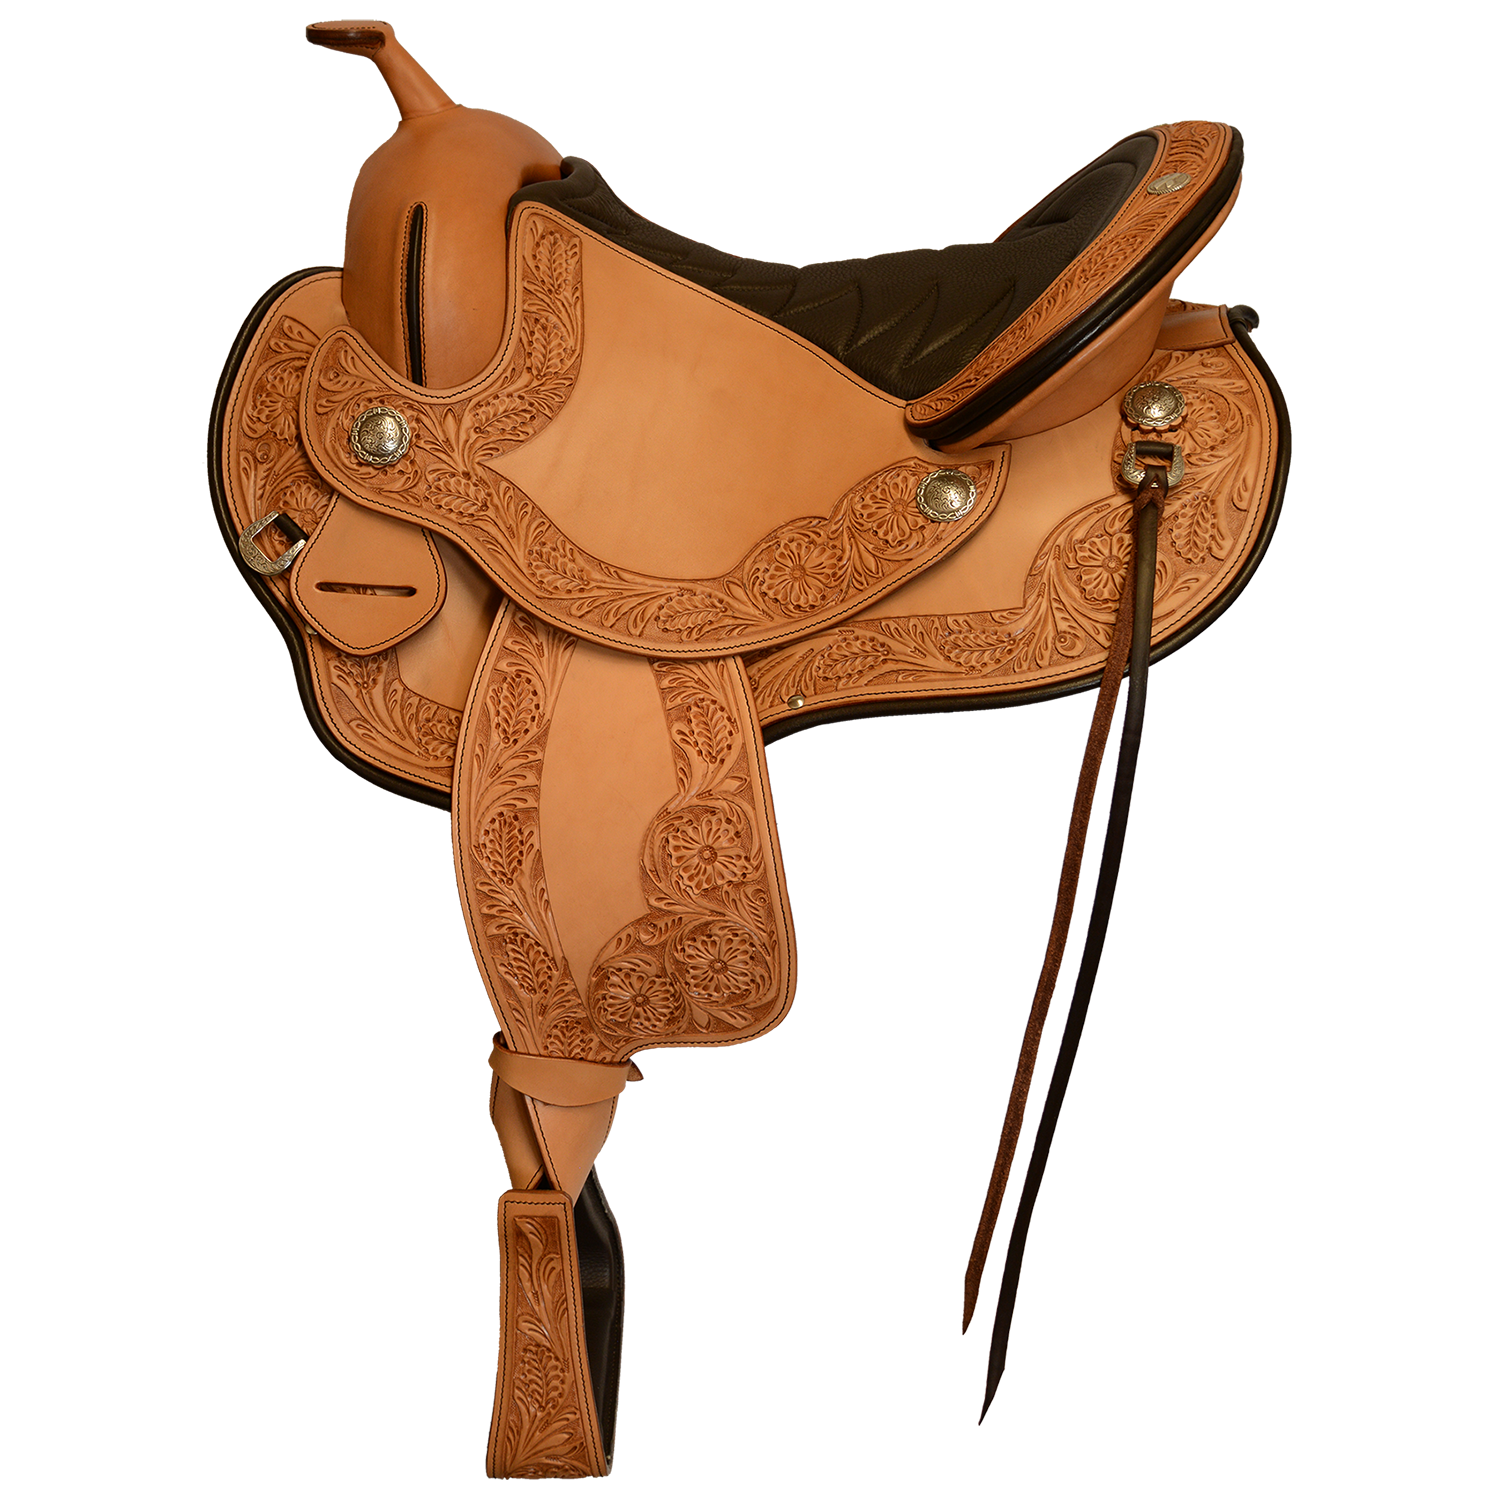 How Heavy Is A Western Saddle